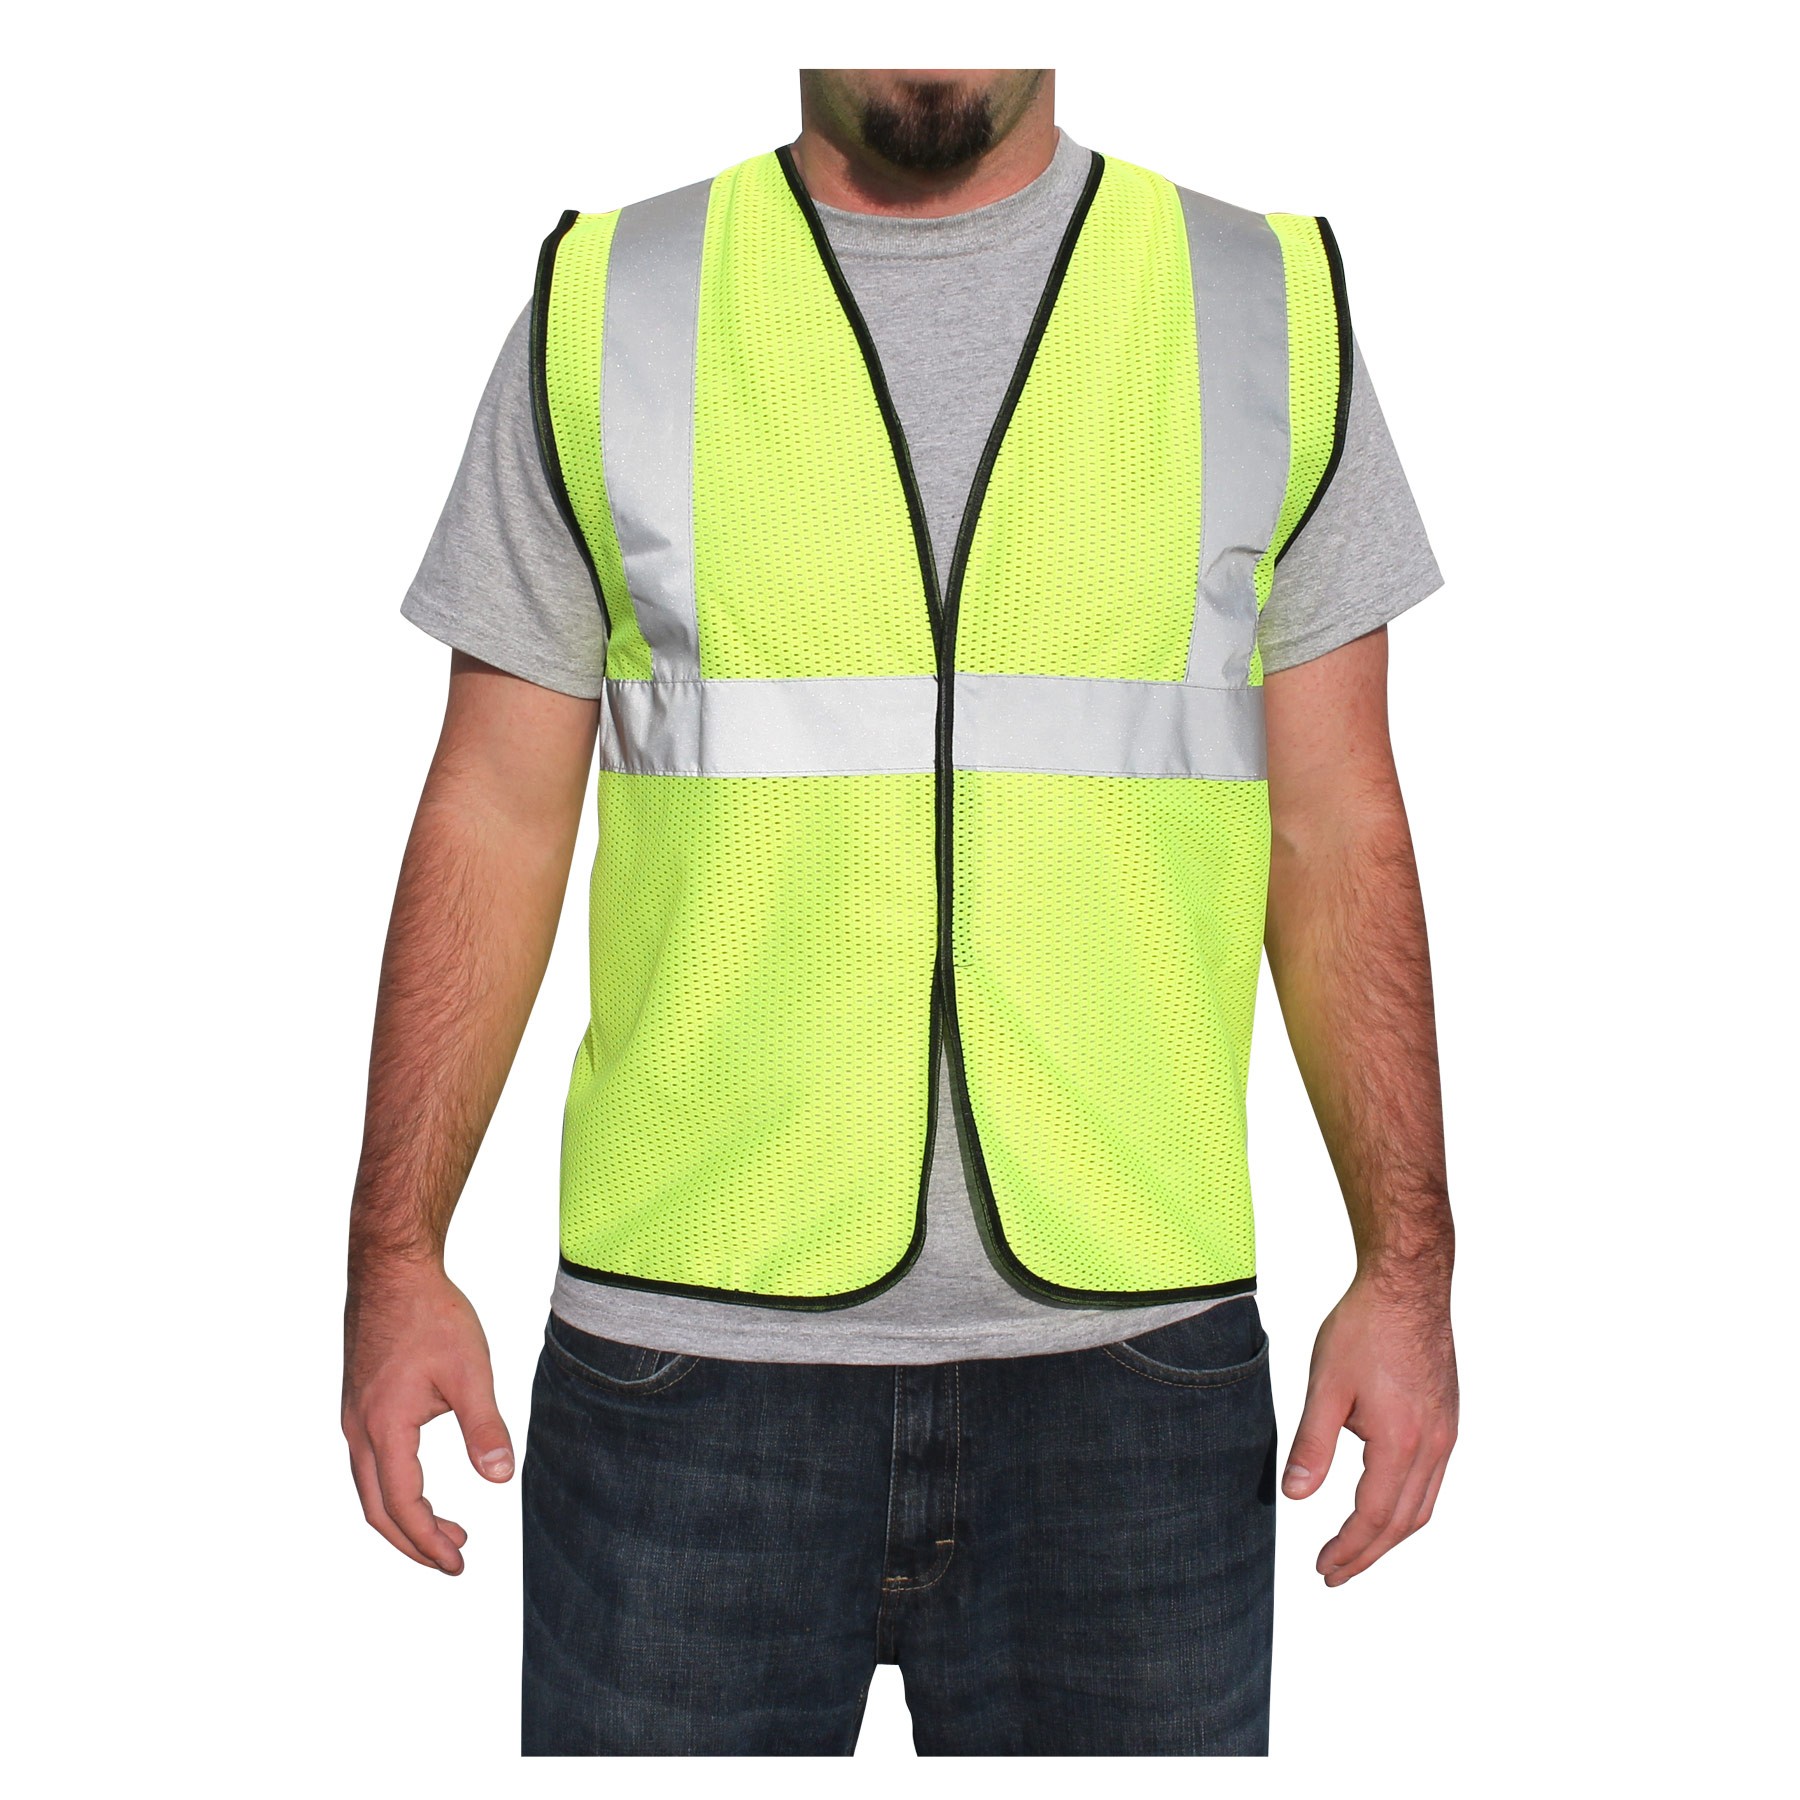 Rugged Blue Type R Class 2 High-Vis Economy Mesh Safety Vest